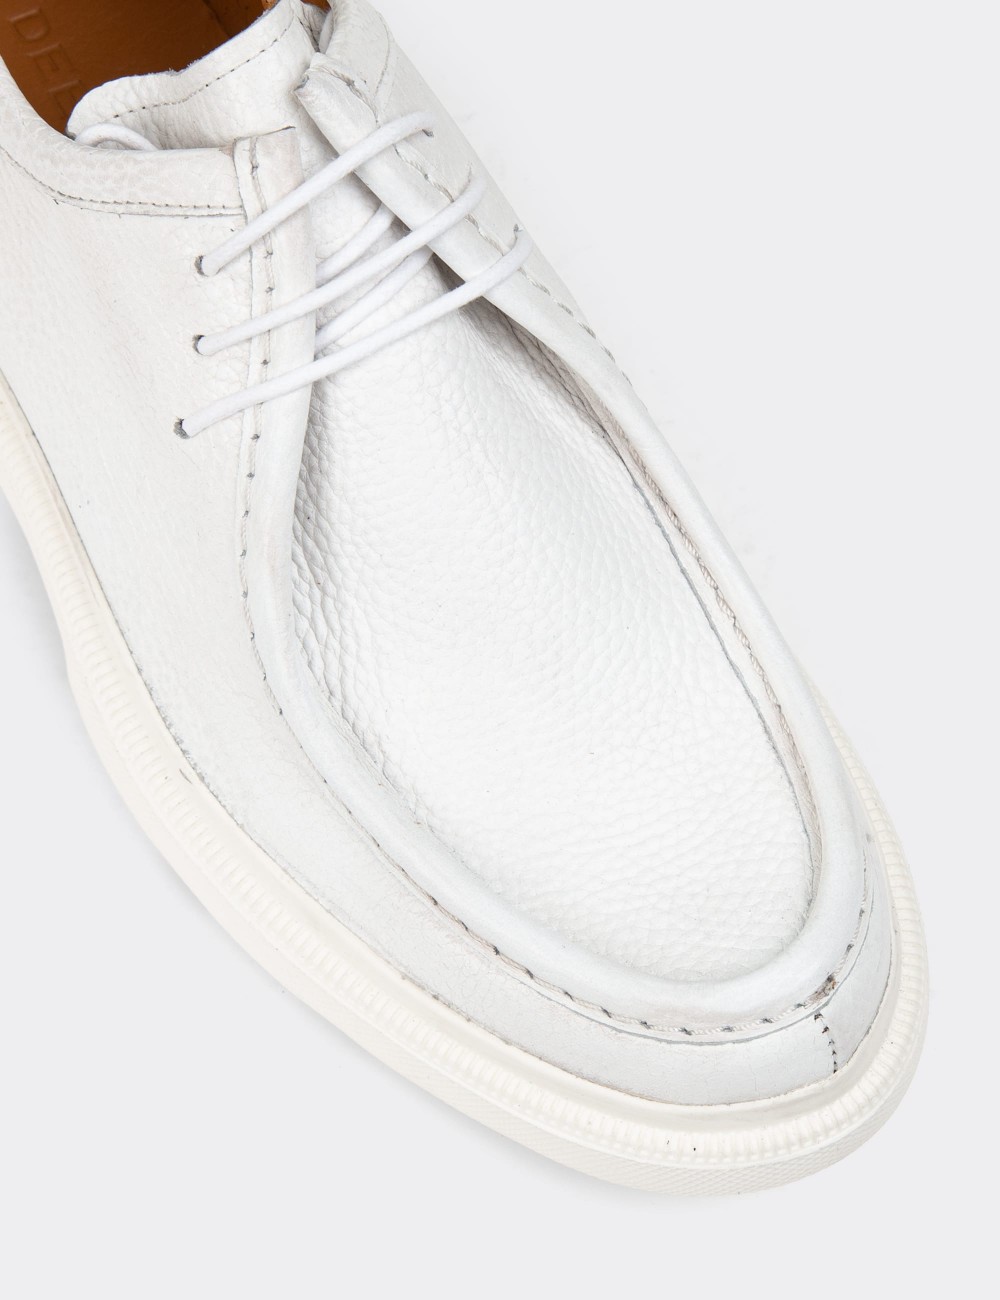 White Leather Lace-up Shoes - 01851MBYZP01